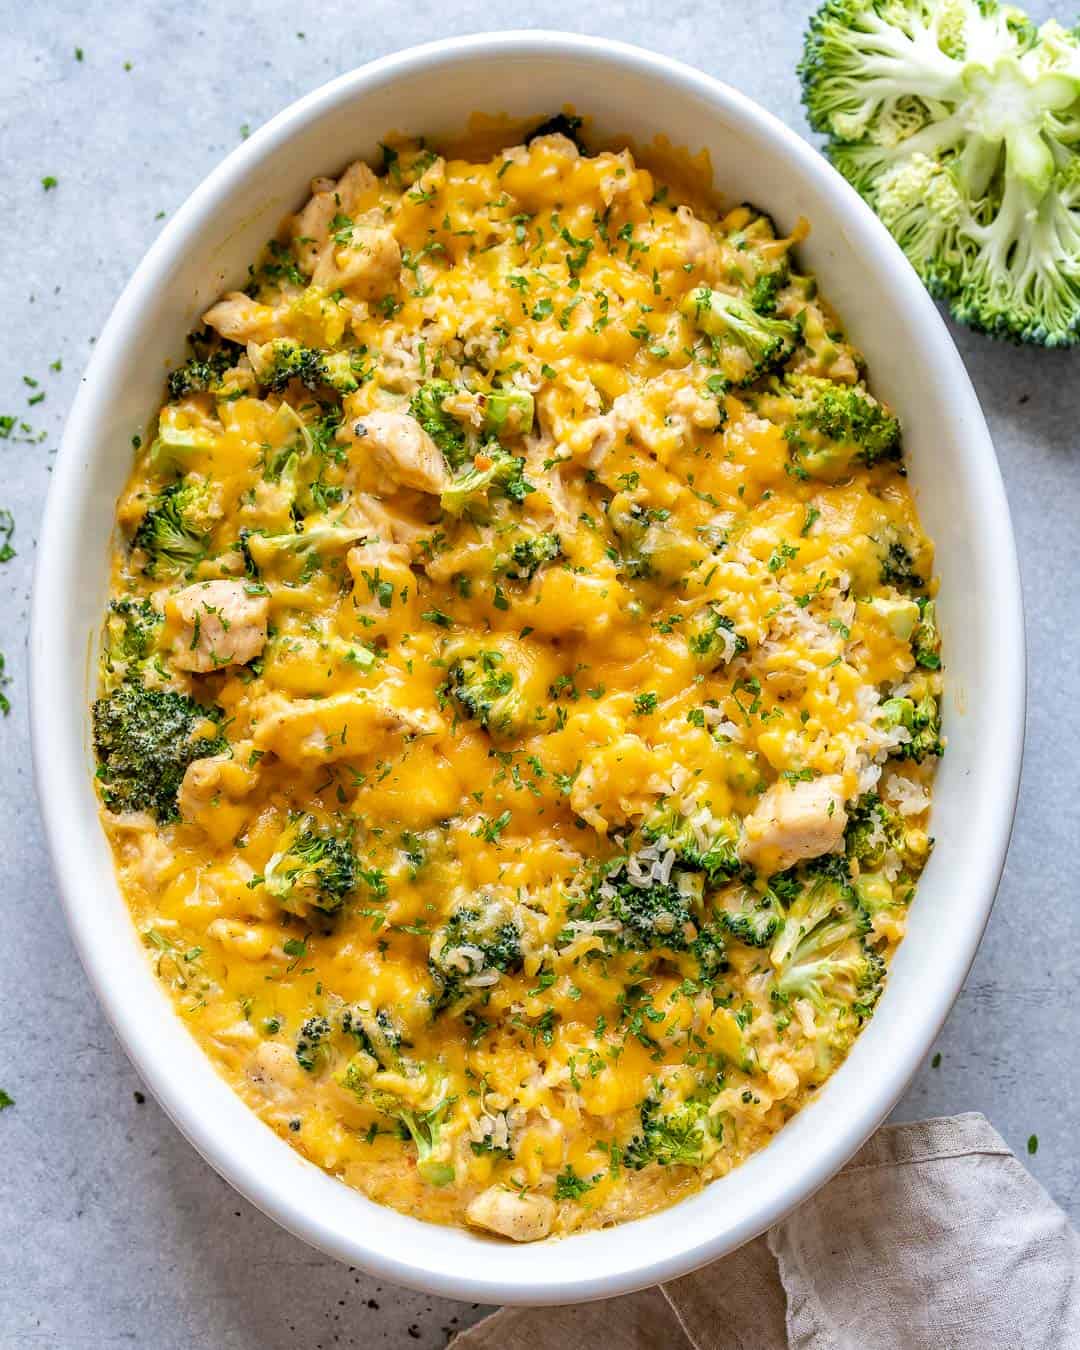 Baked finished chicken broccoli casserole